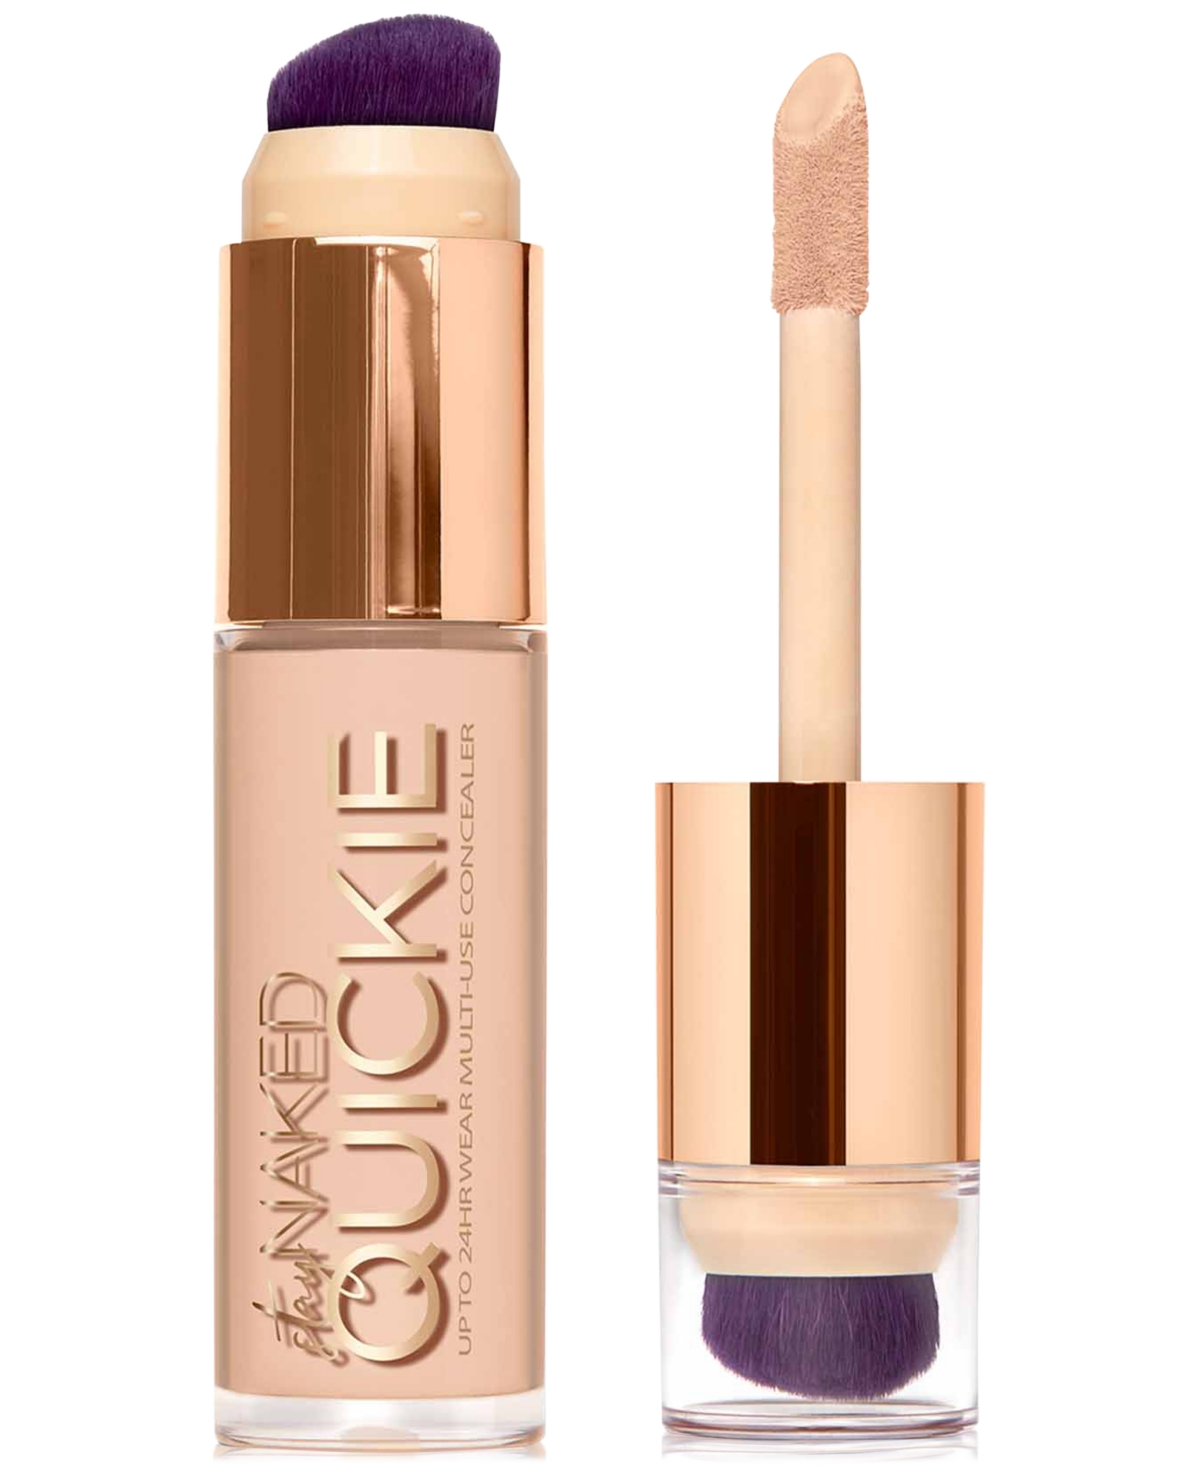 Urban Decay Quickie 24h Multi-use Hydrating Full Coverage Concealer, 0.55 Oz. In Wy (light Medium Warm Yellow)